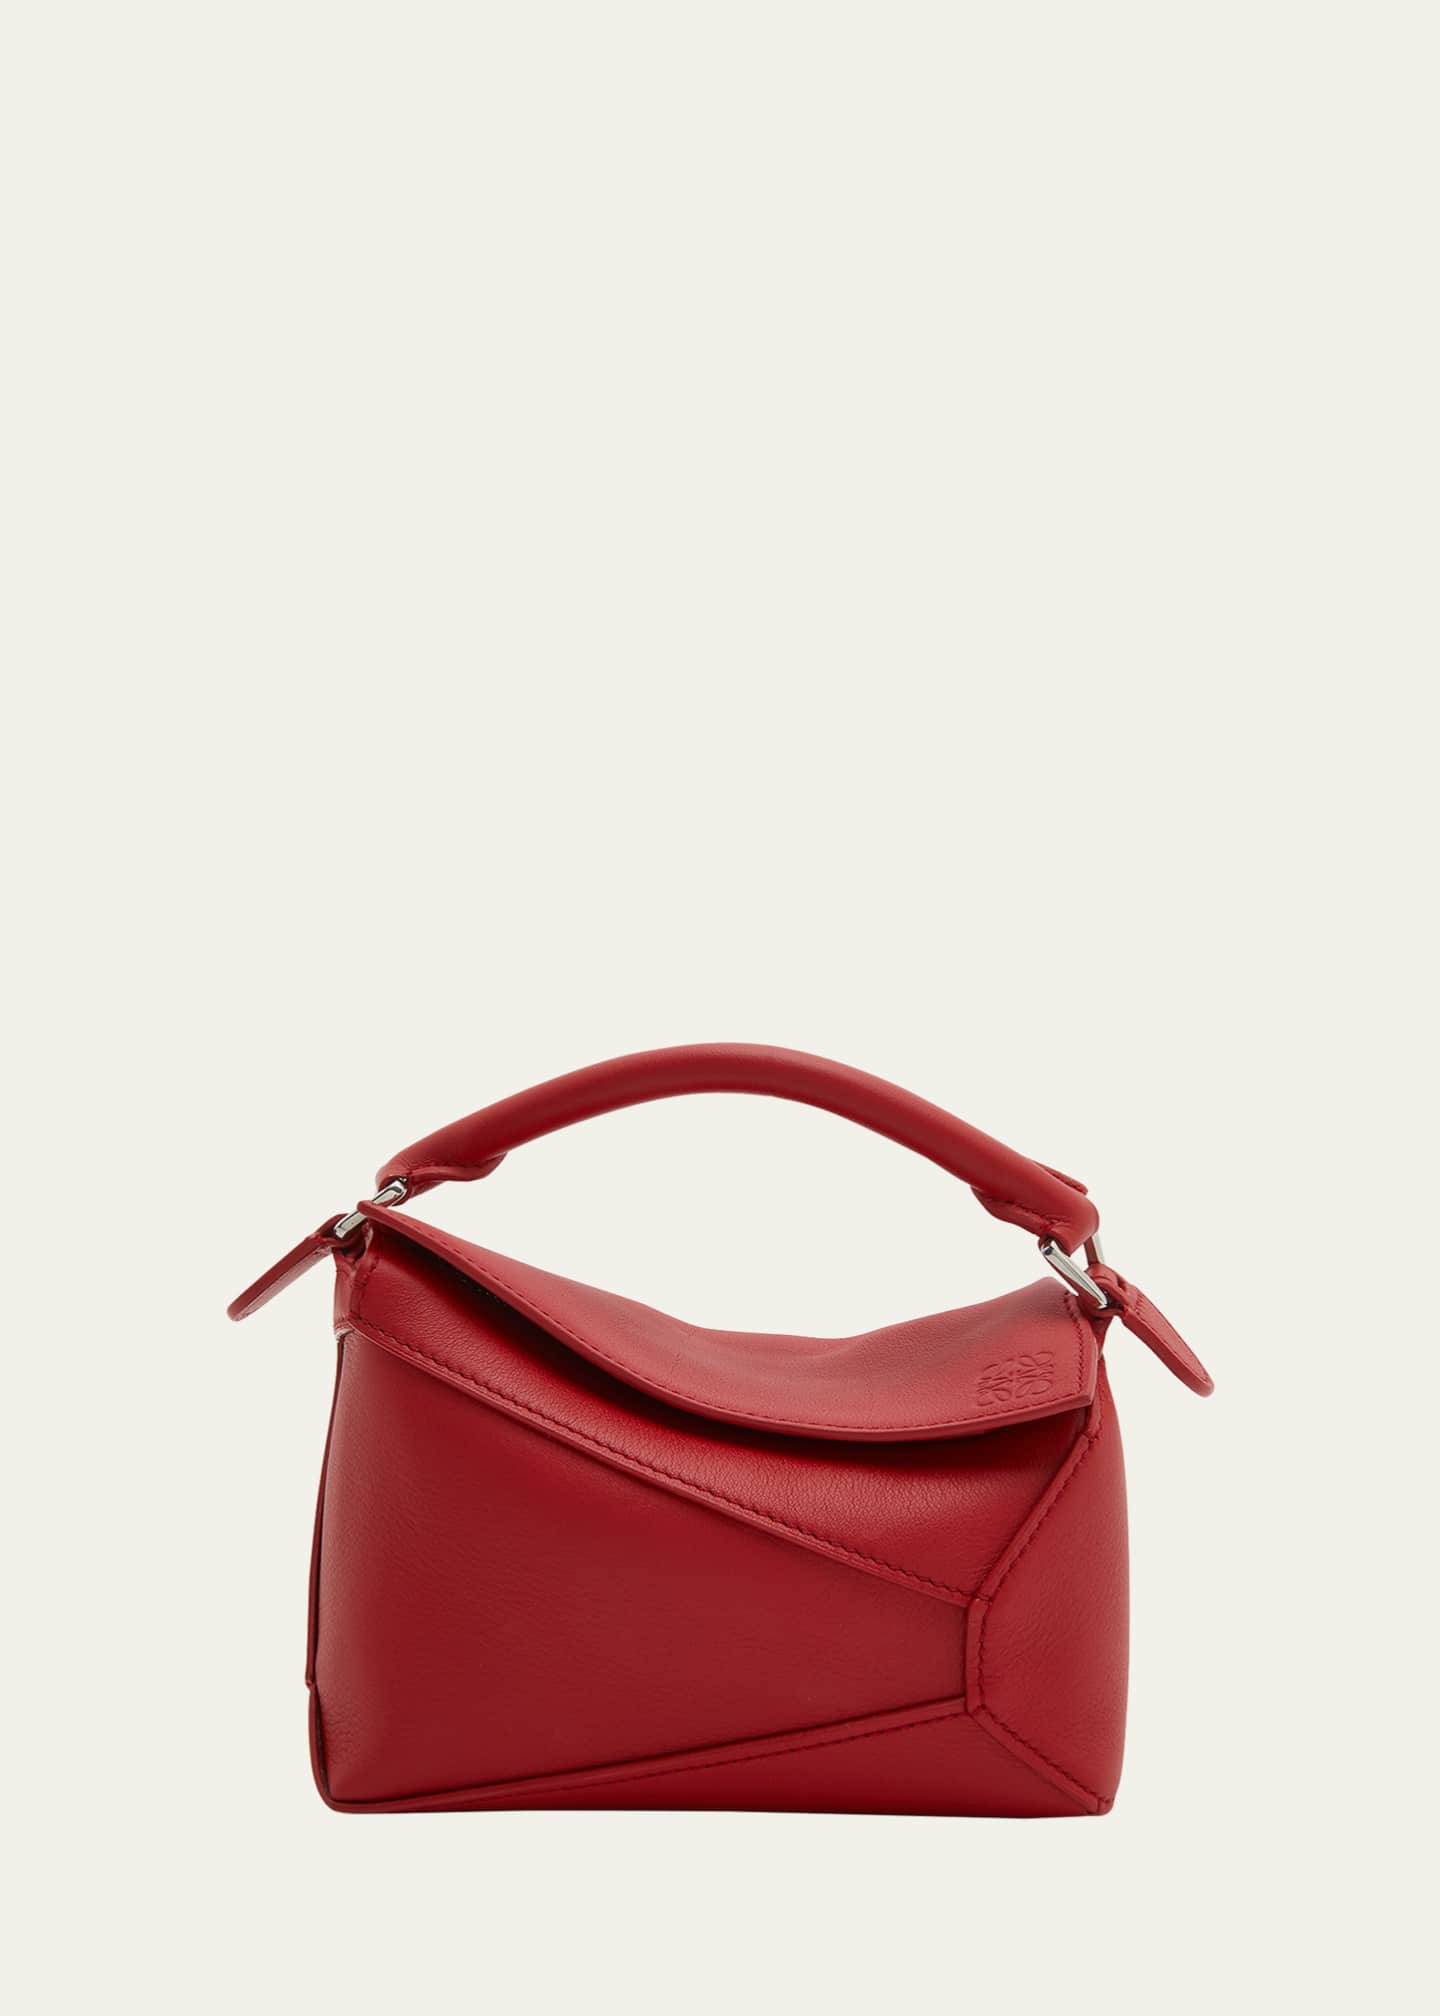 How much are Loewe 'Puzzle' bags? Where to buy and more